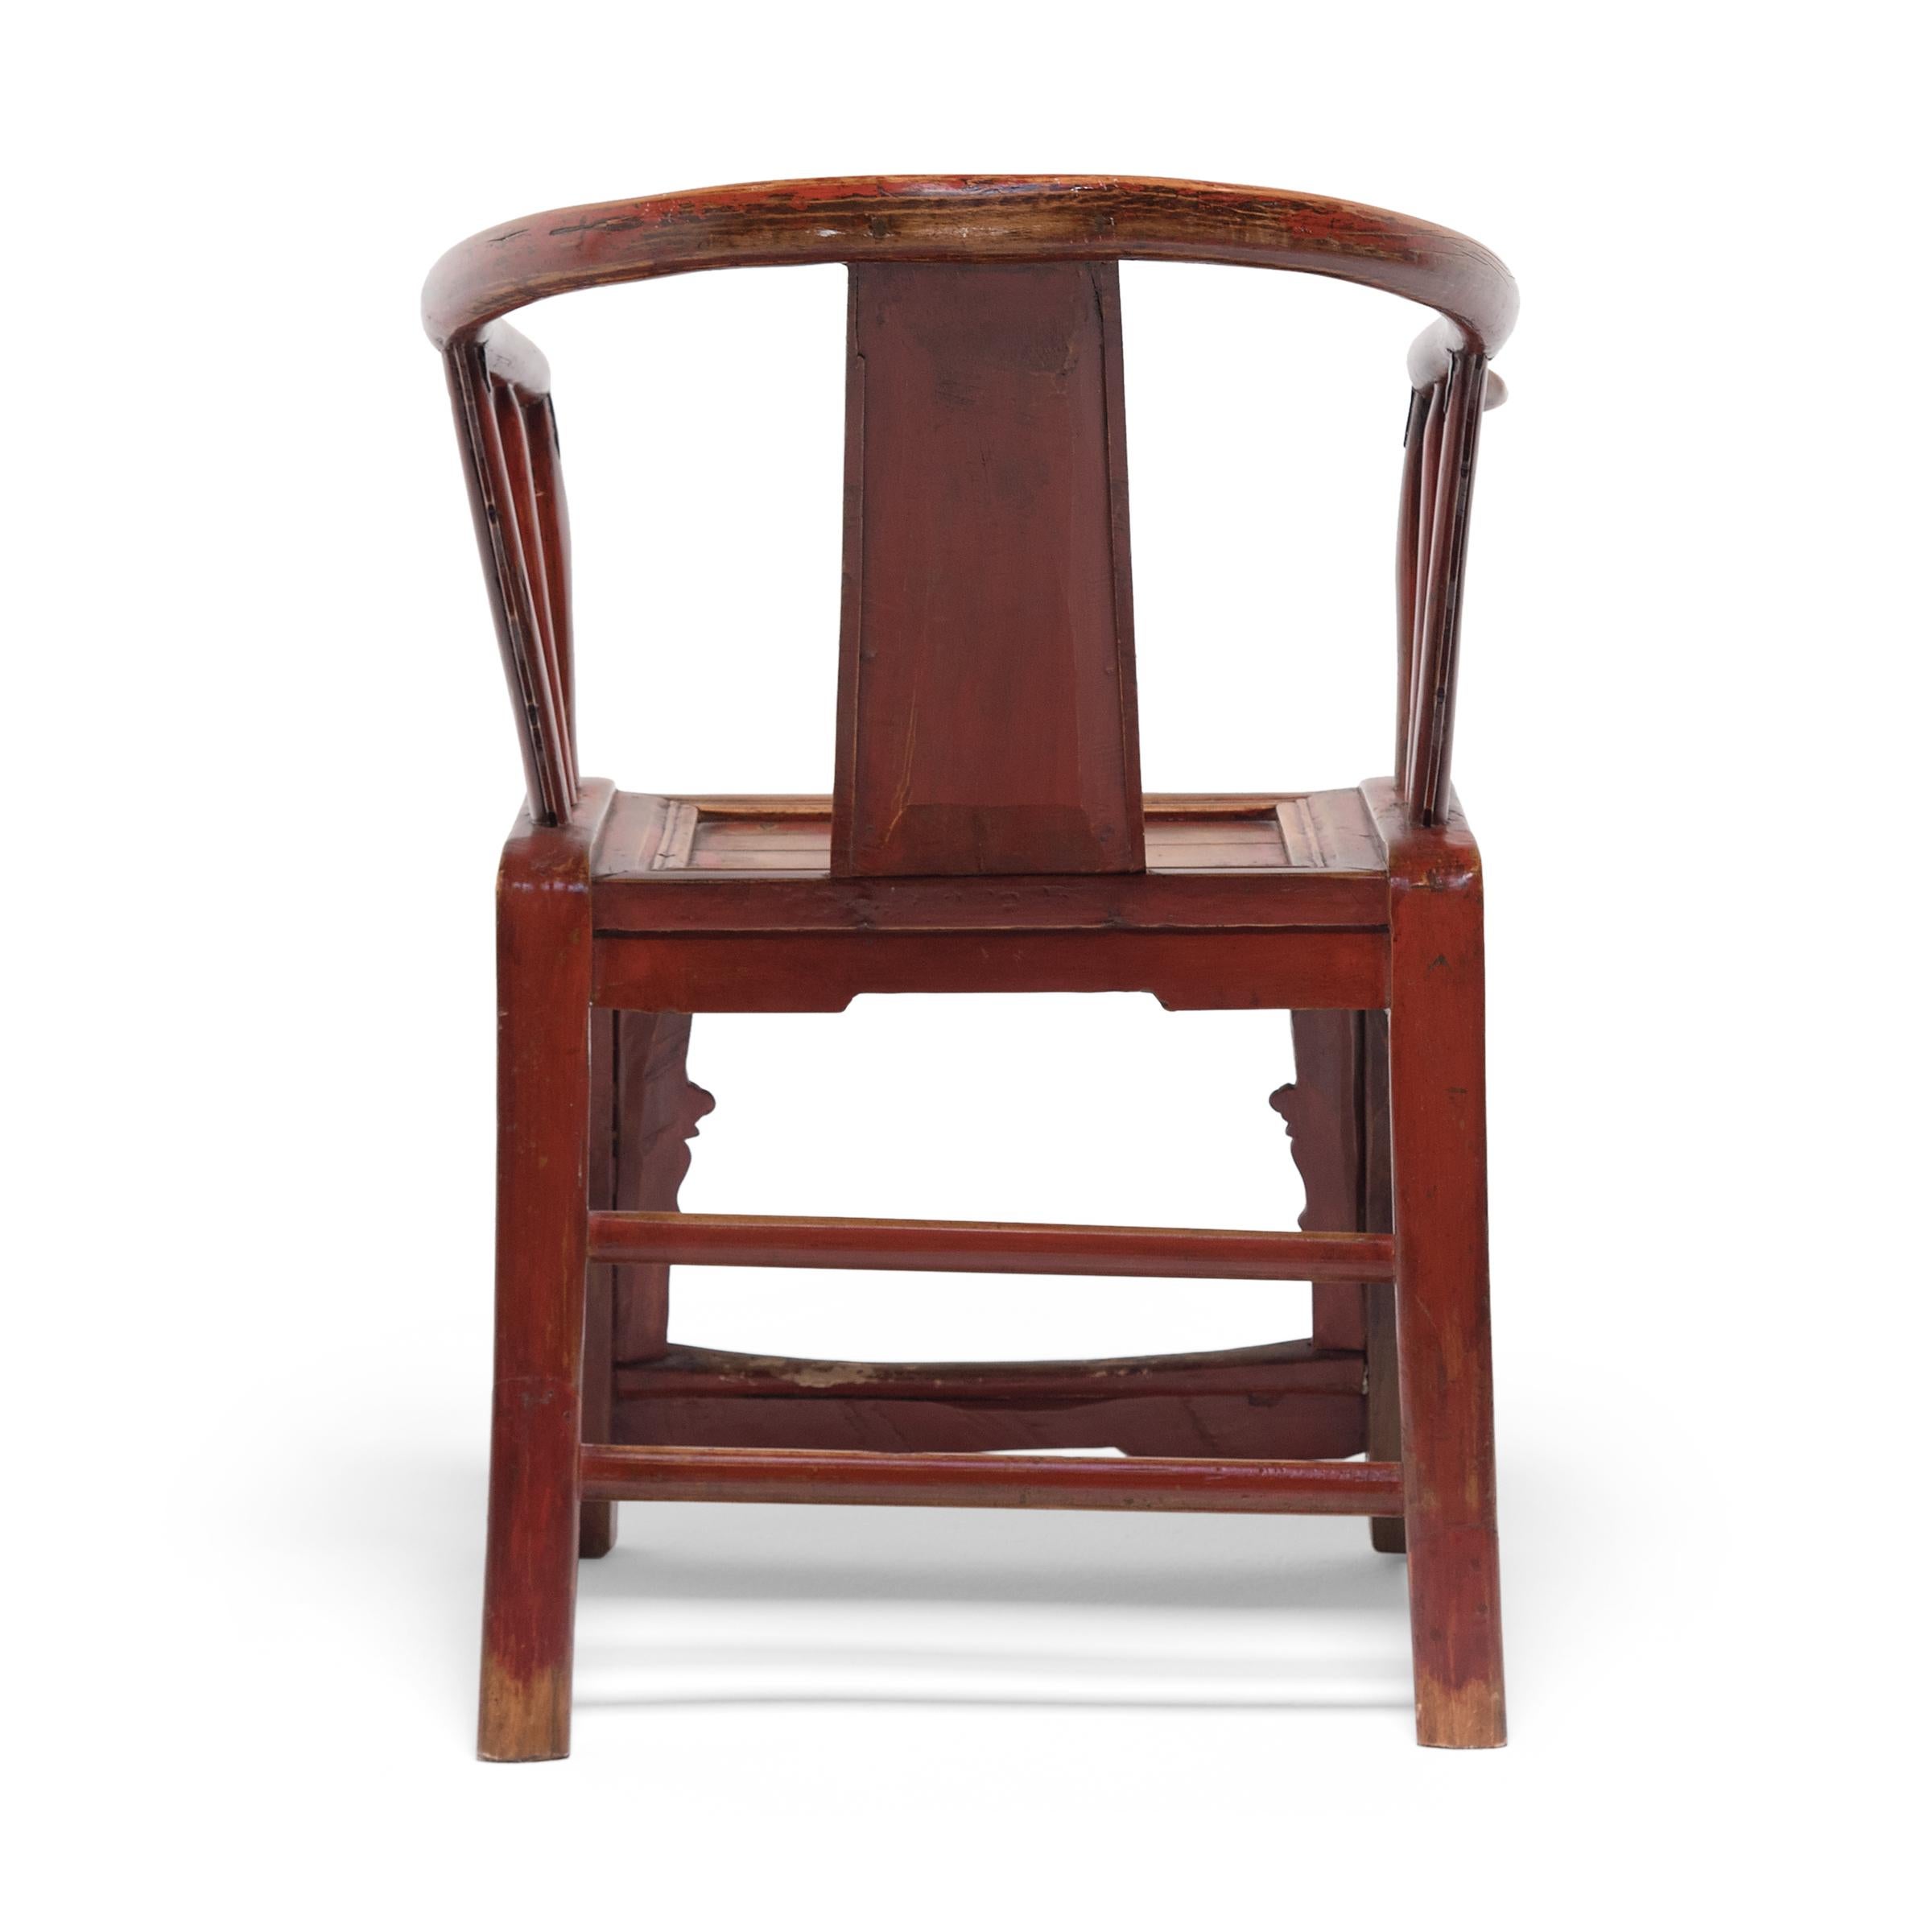 Lacquered Pair of Chinese Red Lacquer Roundback Chairs, circa 1900